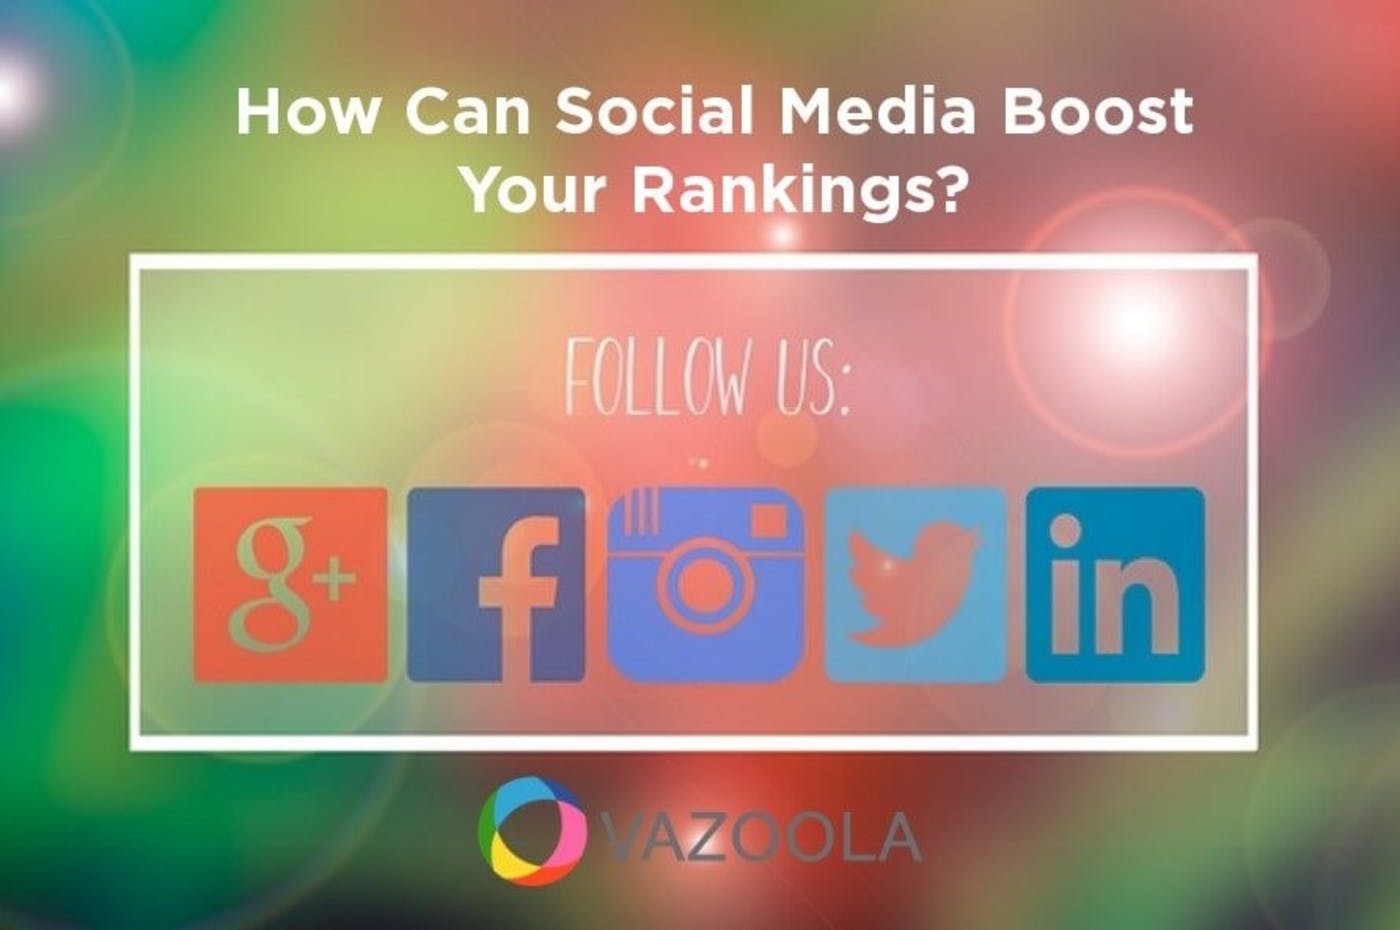 How Can Social Media Boost Your Rankings?